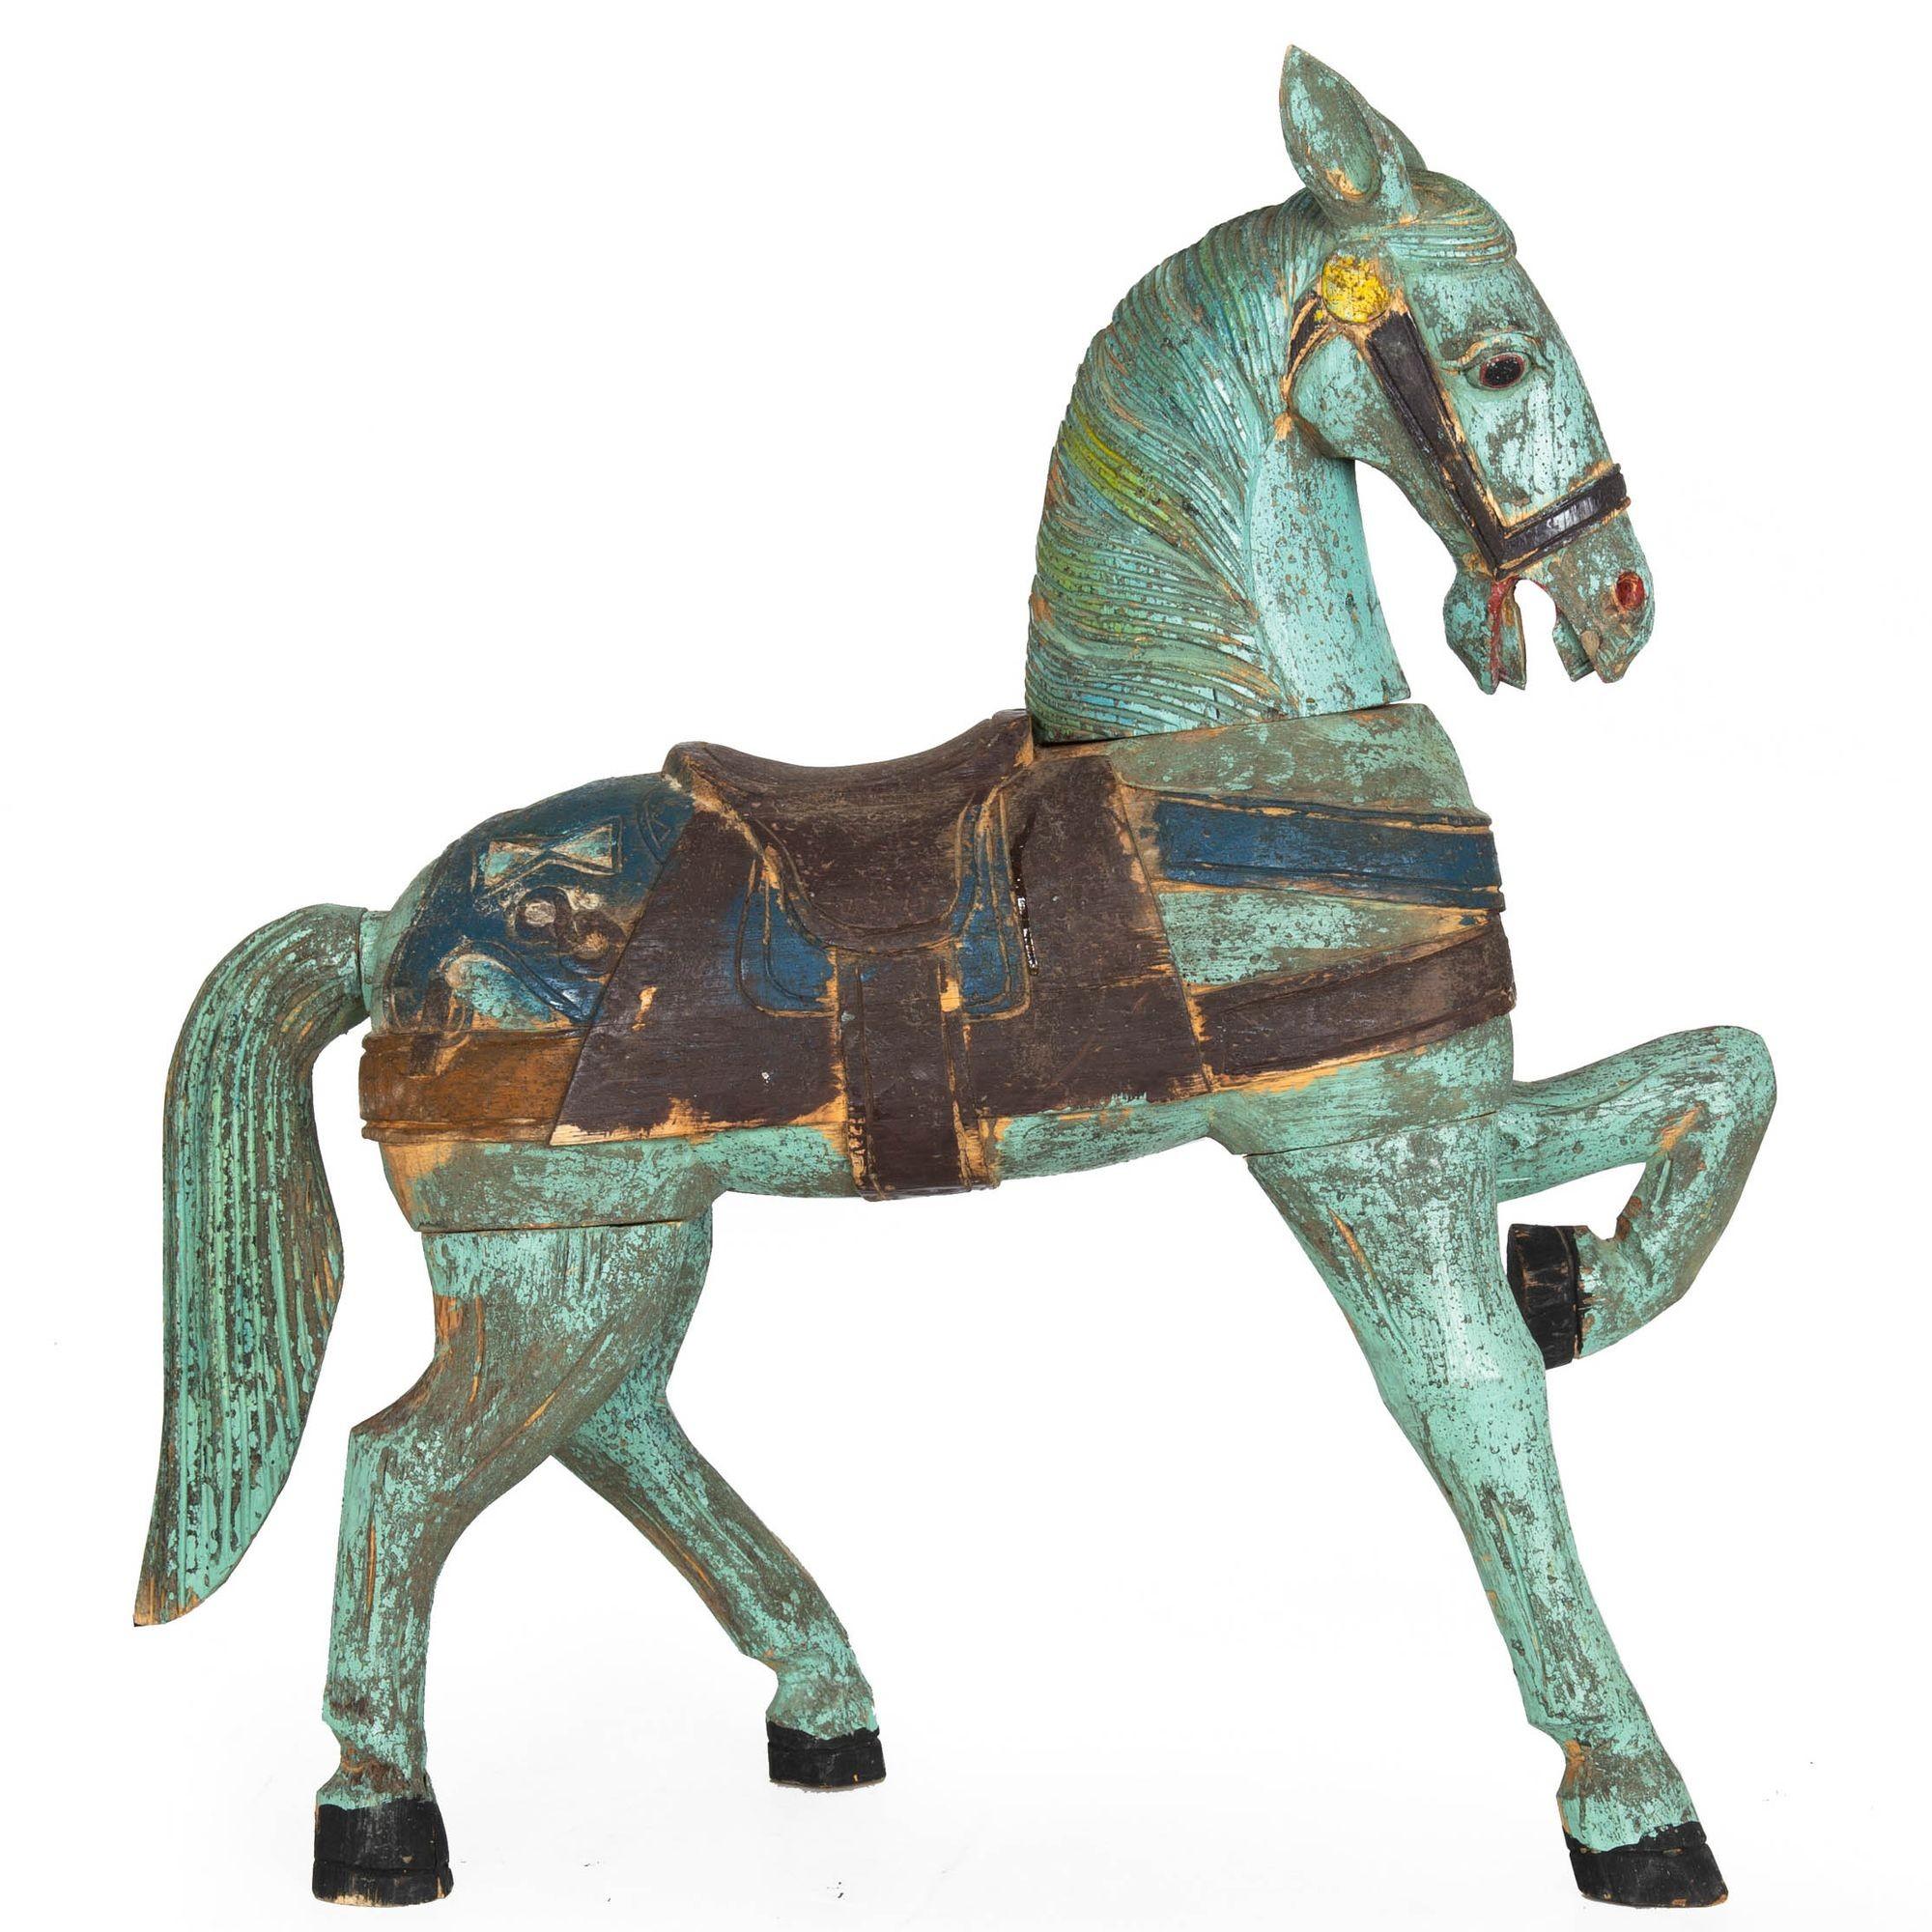 FOLK ART PAINTED AND CARVED WOOD HORSE
20th century, unsigned, designed to be entirely disassembled
Item # 305FEB10P 

An incredibly fun and playful carved and painted folk art horse, it is a clever design that entirely disassembles. It utilizes